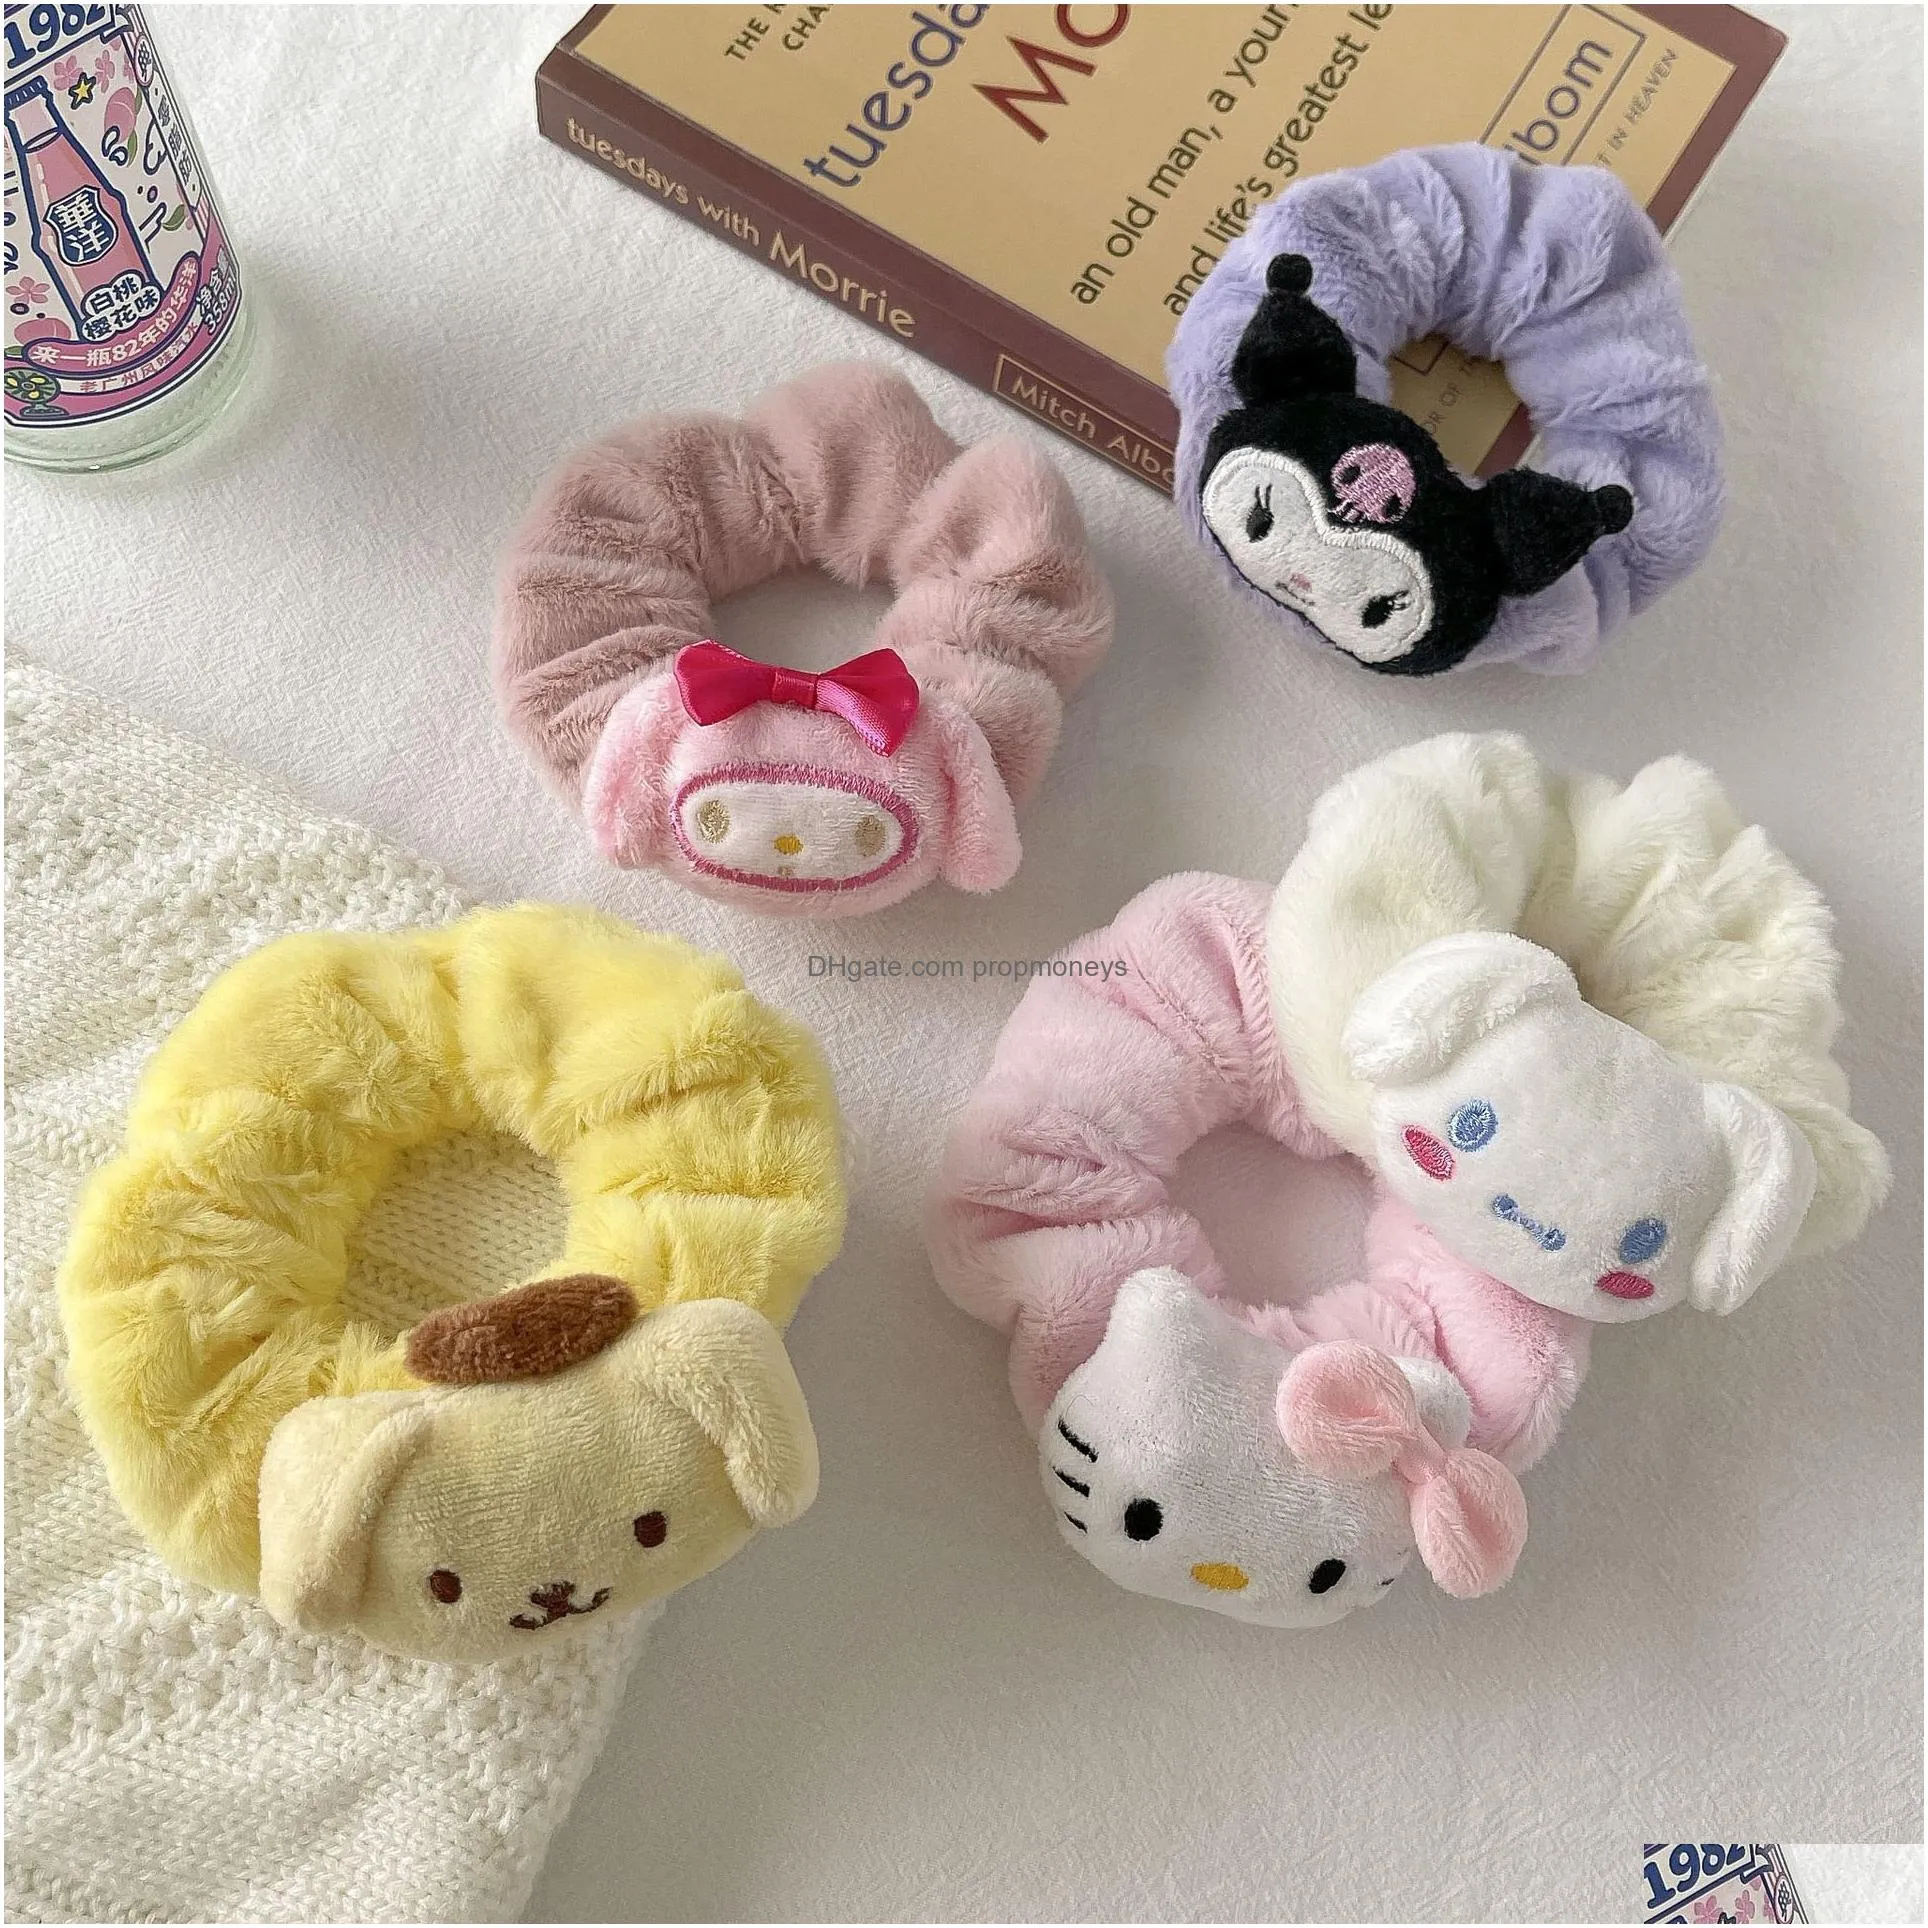 Hair Accessories 5 Colors Fashion Kuromi Cinnamoroll Charms Hairband Girls Elastic Hair Band Accessories Drop Delivery Baby, Kids Mate Dhd6S